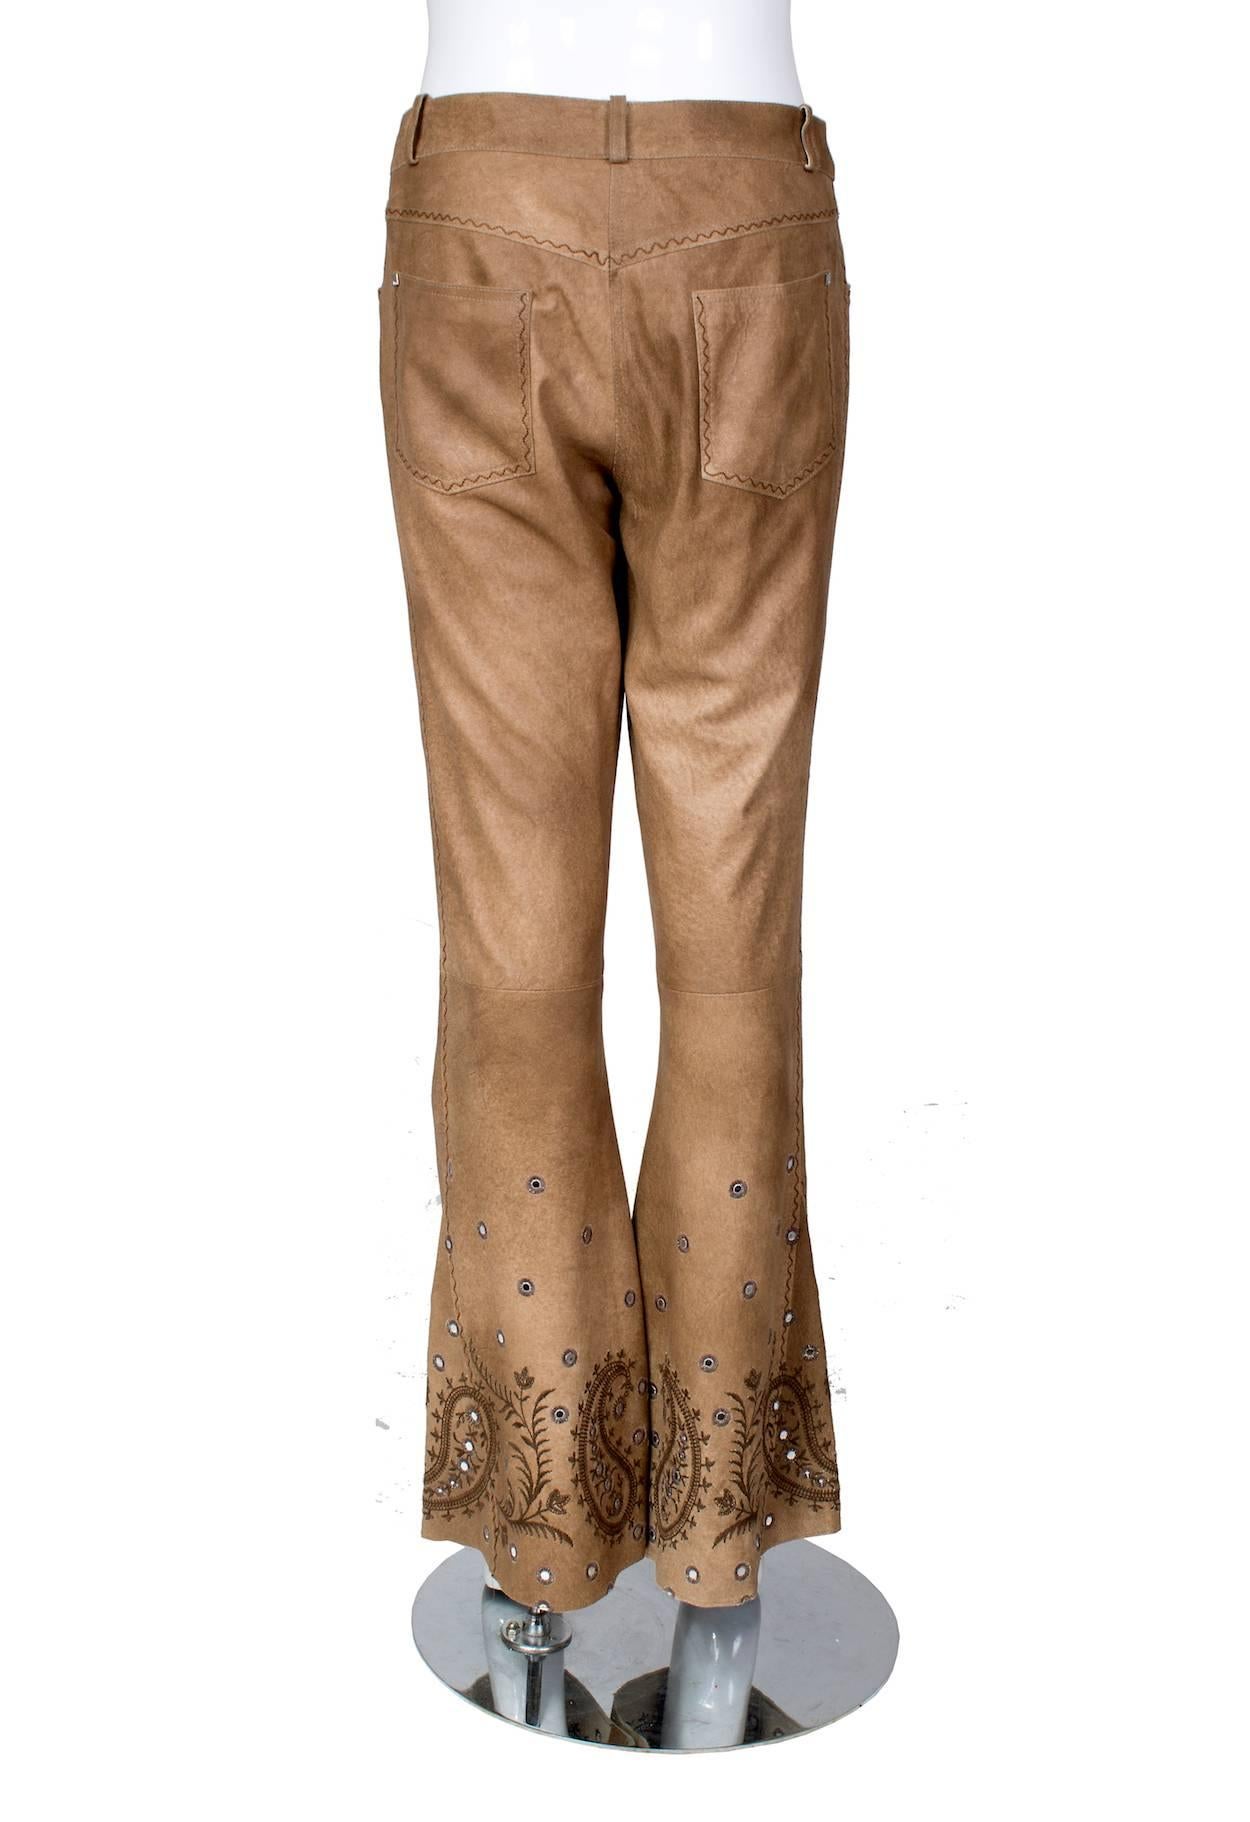 These are a pair of pants by John Galliano for Dior circa early 2000s  They are made of brown suede and feature zig zag stitching and embellished paisley design around the bottom of the legs.  

9